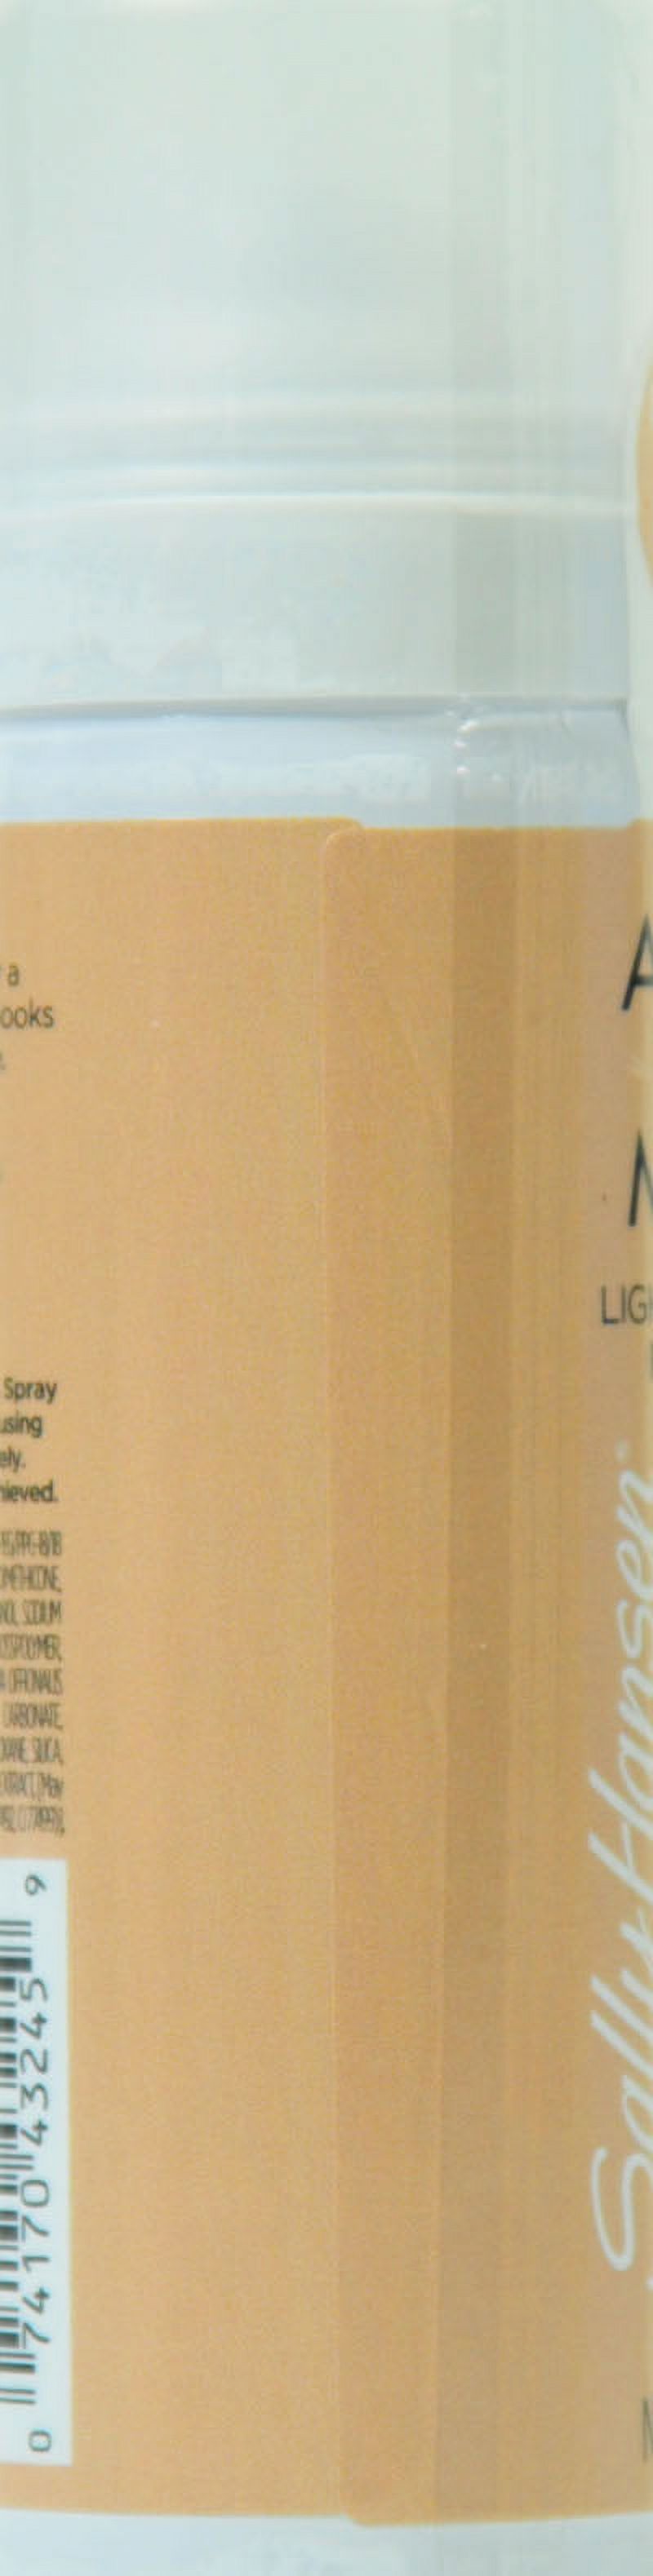 Sally Hansen Airbrush Face Makeup Foundation, Classic Ivory, 1 oz - image 2 of 3